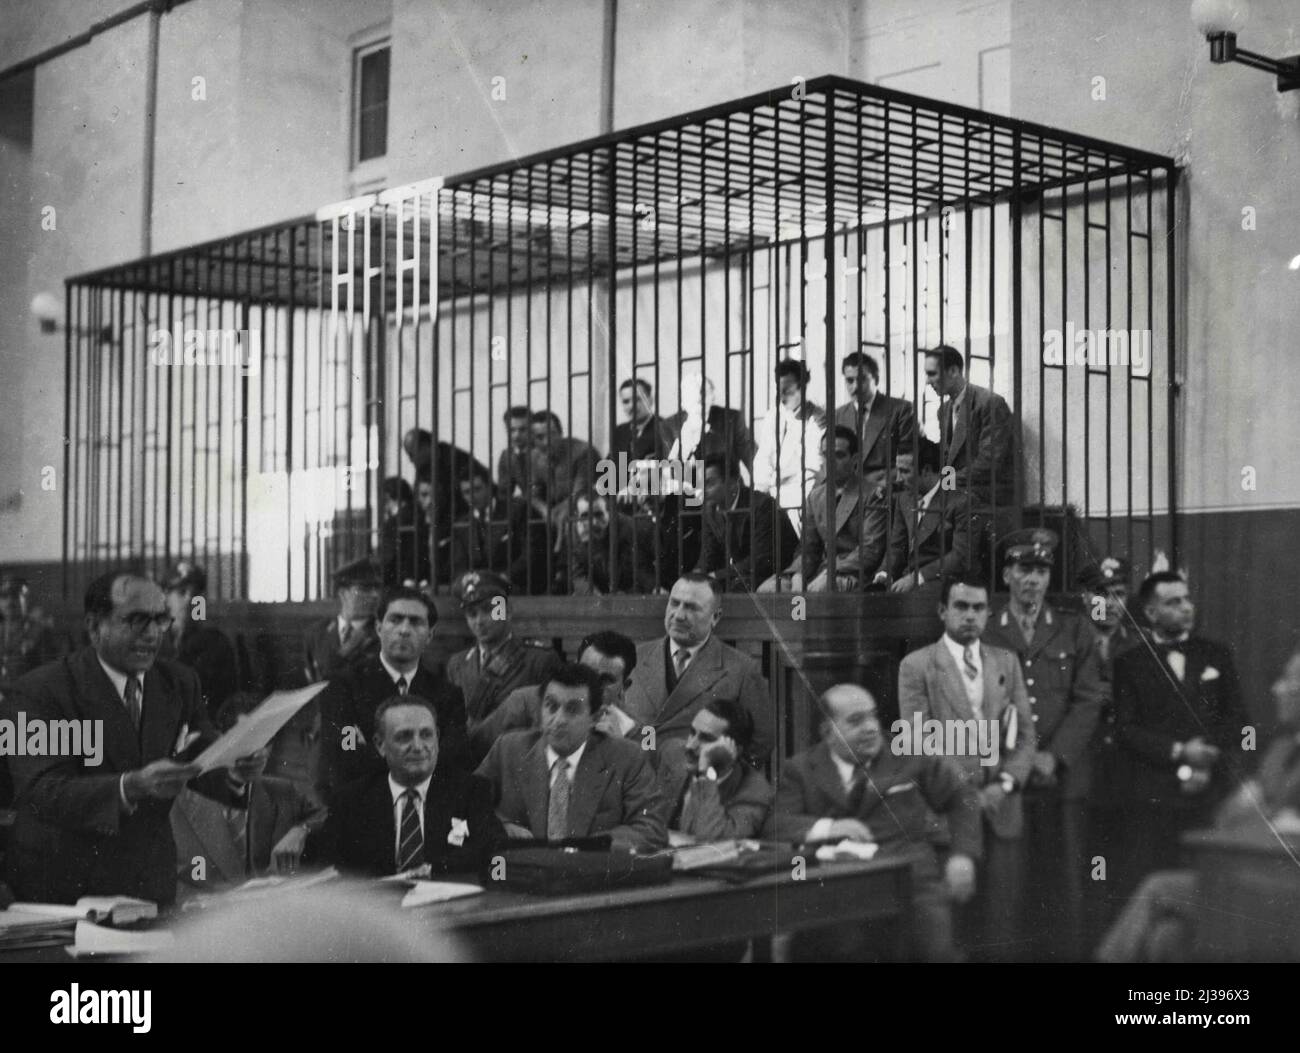 Gangsters Caged In Italy. Italian Gangsters are caged in a Naples police court October 31, as with their leader Giuseppe Lamarca (outside cage, Extreme Right, Dark suit) who is Managled, they face 51 charges of hold up, theft, blackmail and attacks on police. At left Dr. Luigi Caporale defence attorney for the men, reads a statement attorney for the men, reads a statement to the court. Lamarca has written his will, leaving a house to Caporale. This house, says the Bandit, will become a 'holy Shrine' visited by thousands of pilgrims during Holy Year. November 3, 1949. (Photo by Associated Stock Photo